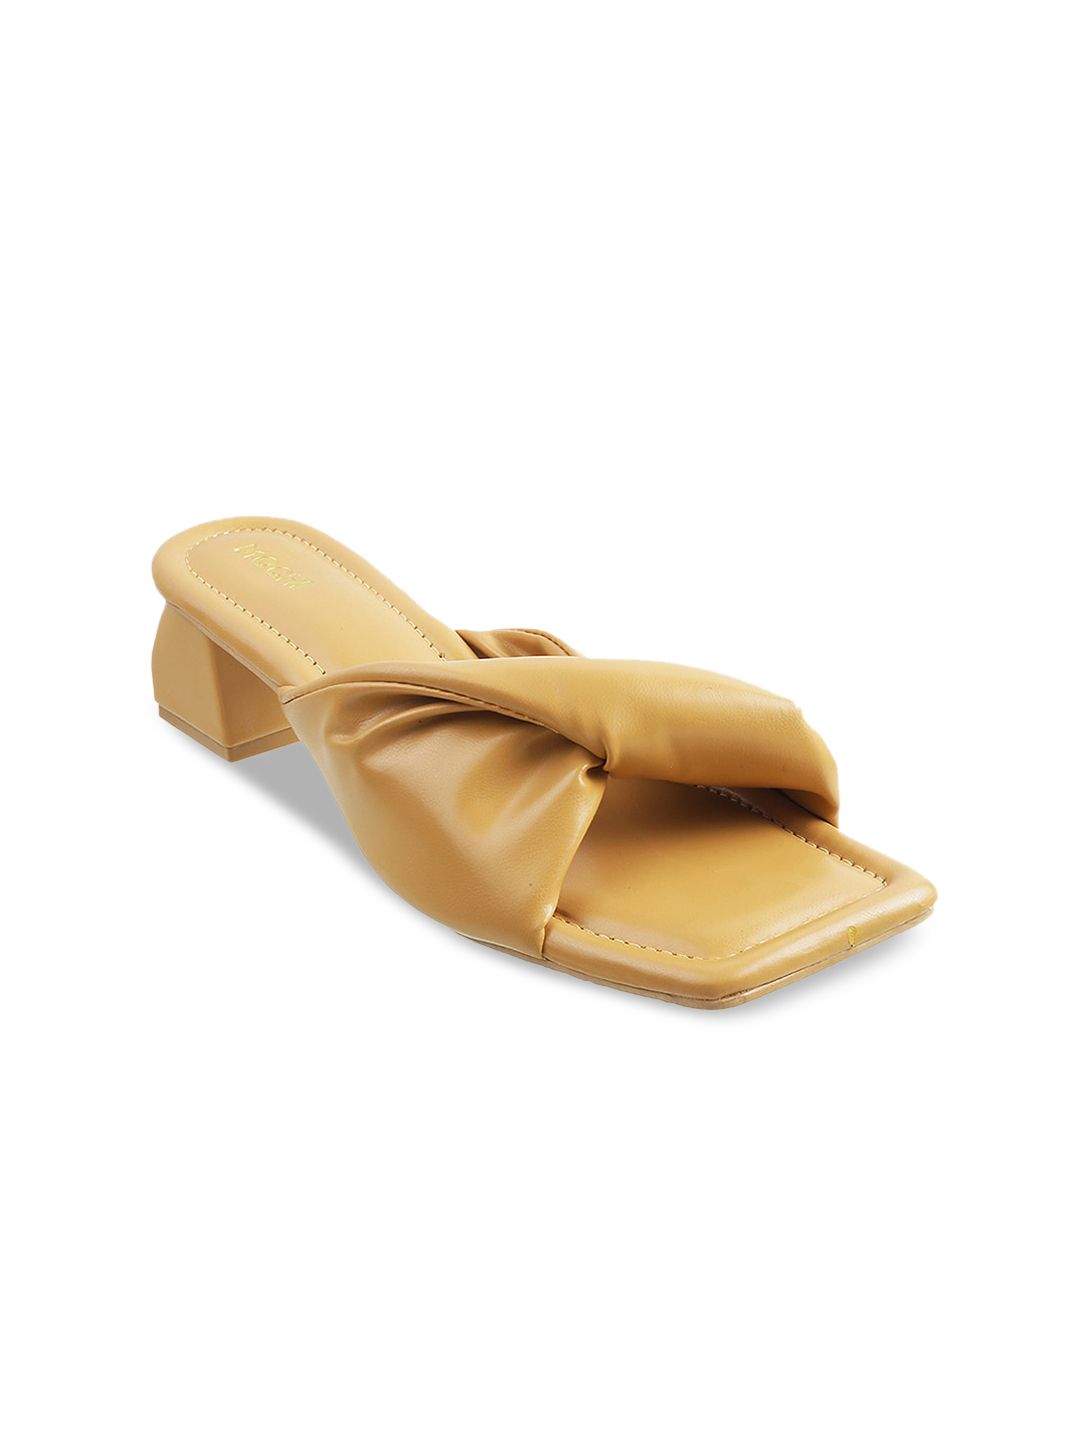 Mochi Beige Block Sandals with Bows 3 Inch Heels Price in India